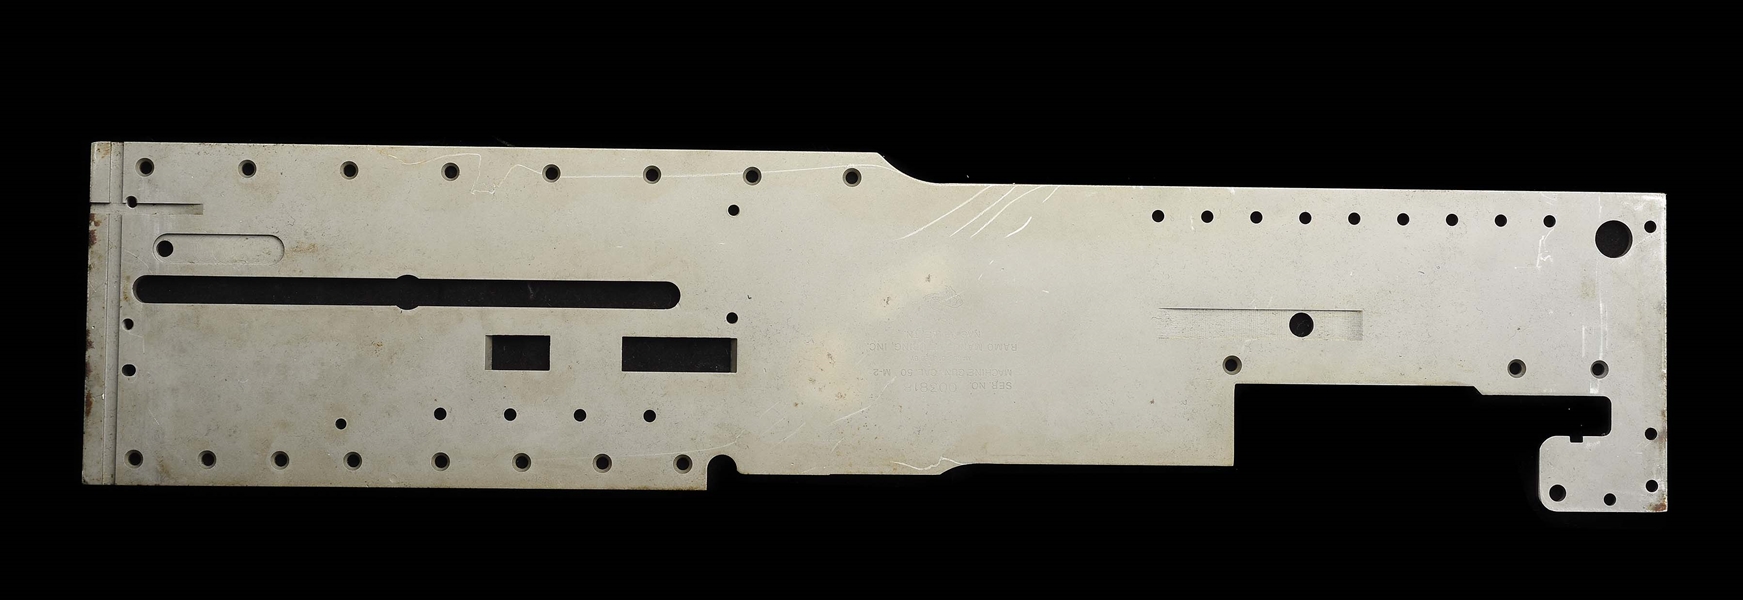 (N) HIGHLY SOUGHT RAMO MANUFACTURED M2 .50 CAL REGISTERED MACHINE GUN RIGHT SIDE PLATE (FULLY TRANSFERABLE).